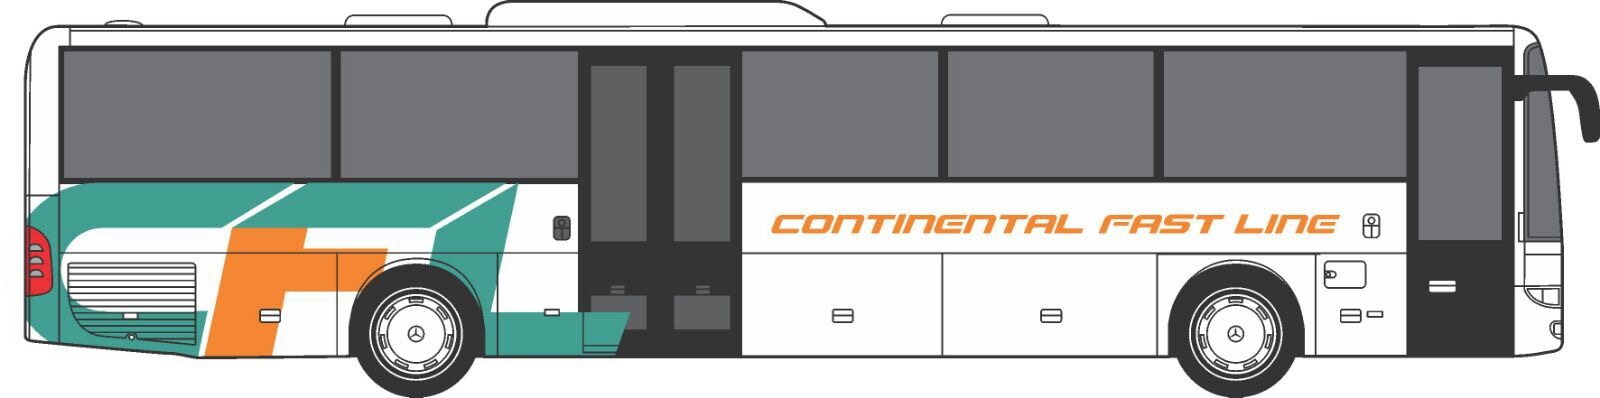 CONTINENTAL FAST LINE S.R.L. undefined: photos 2